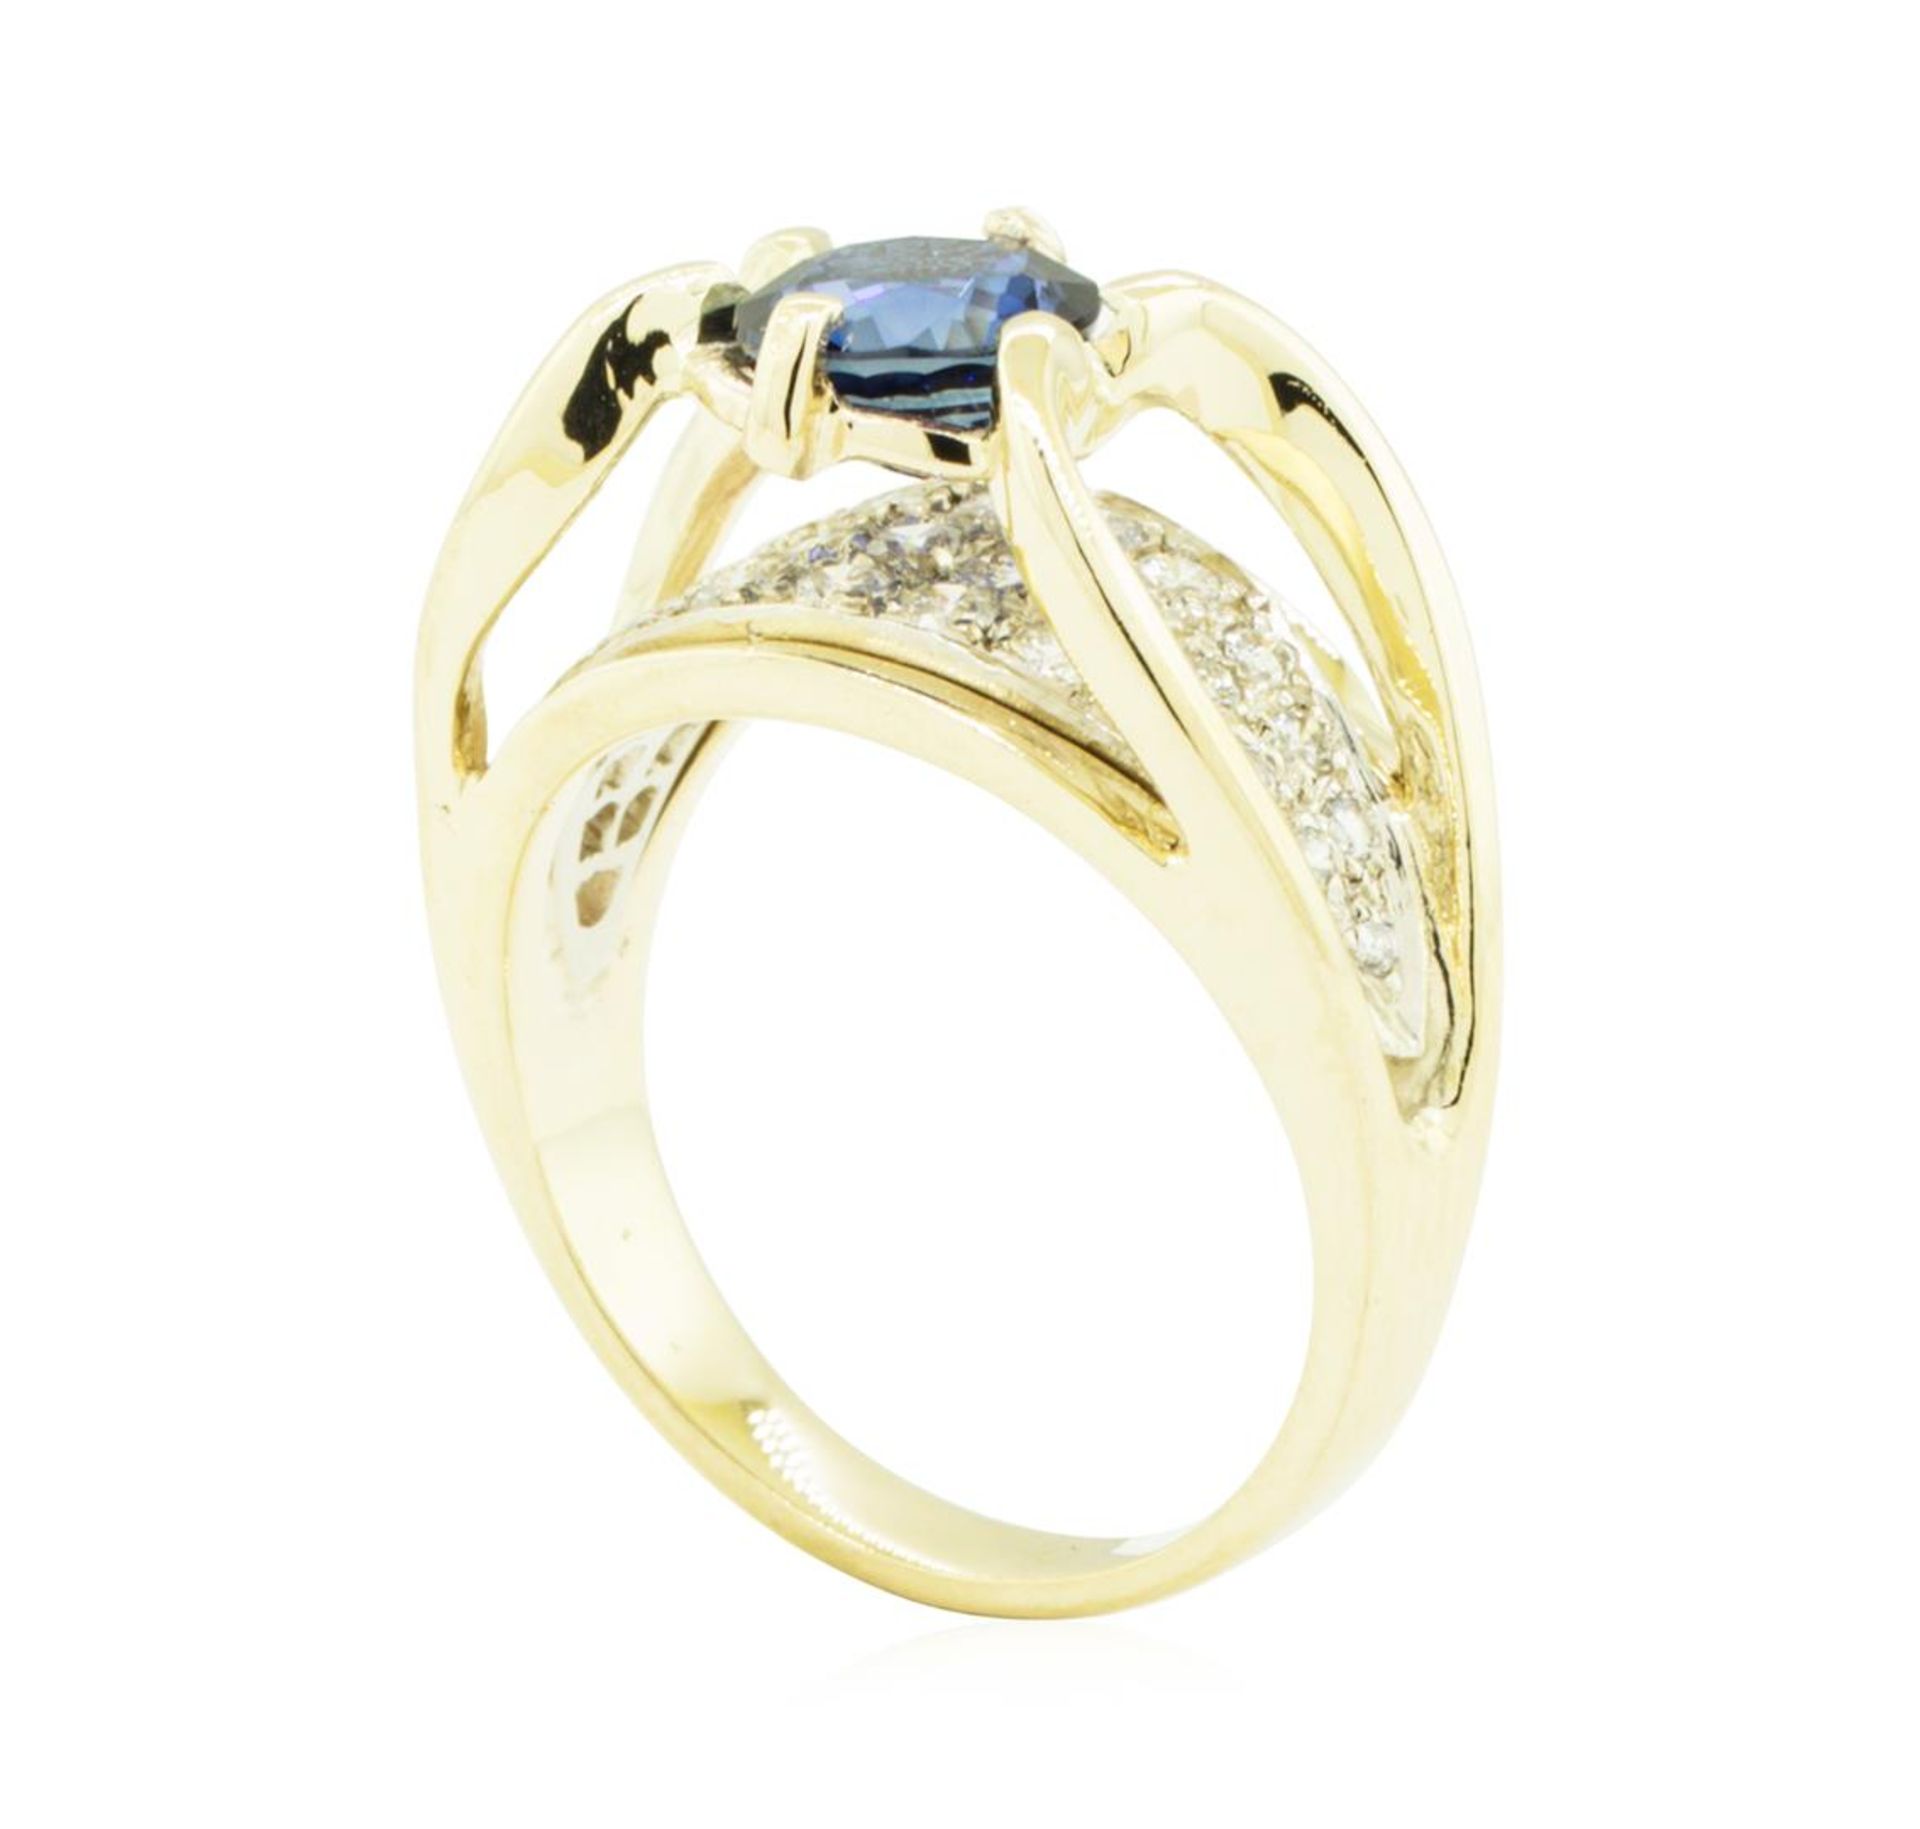 2.24 ctw Round Brilliant Blue Sapphire And Diamond Ring - 14KT Yellow And White - Image 4 of 5